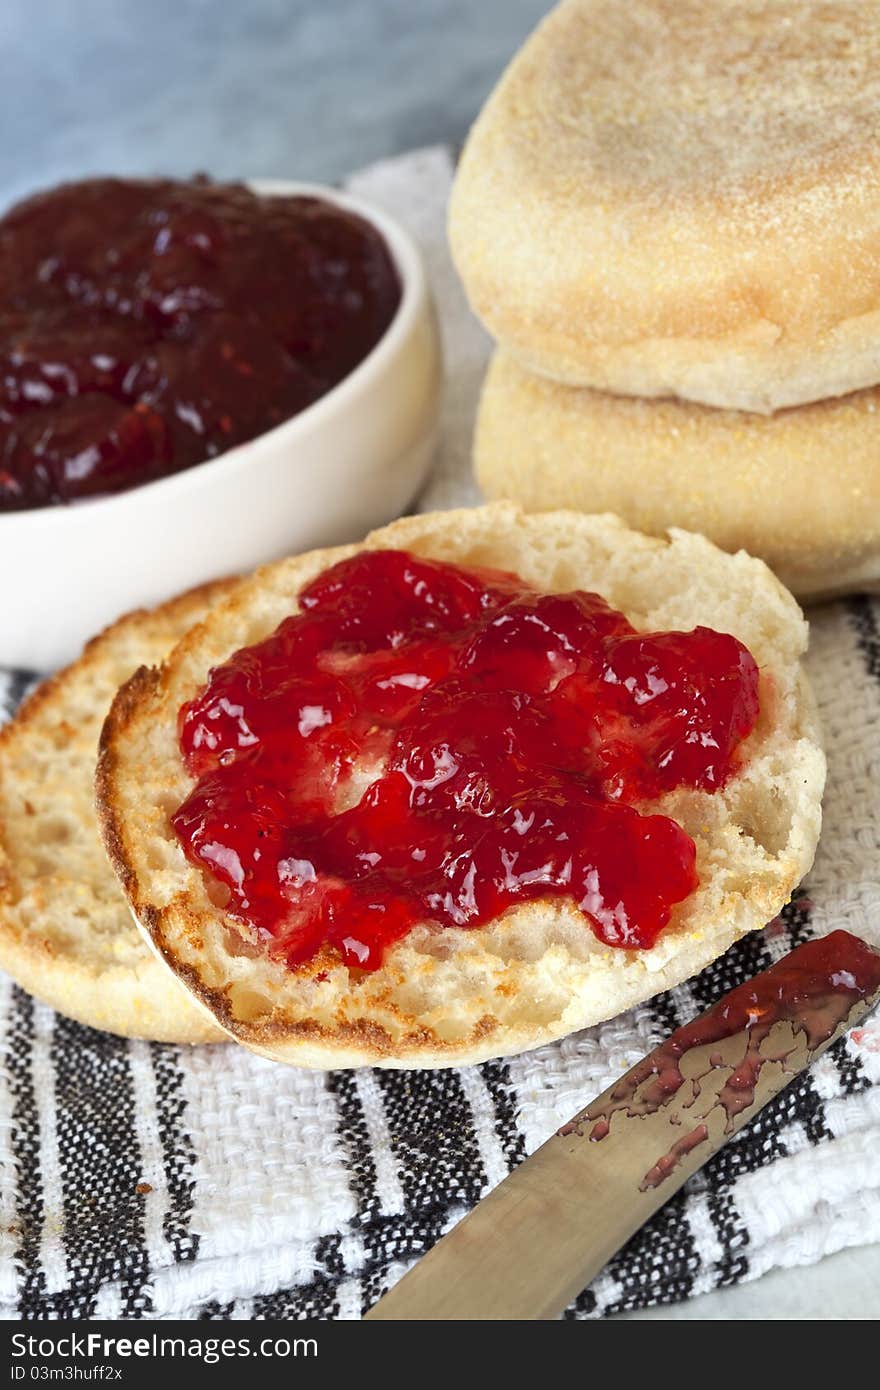 English muffins, one cut and spread with strawberry jam.